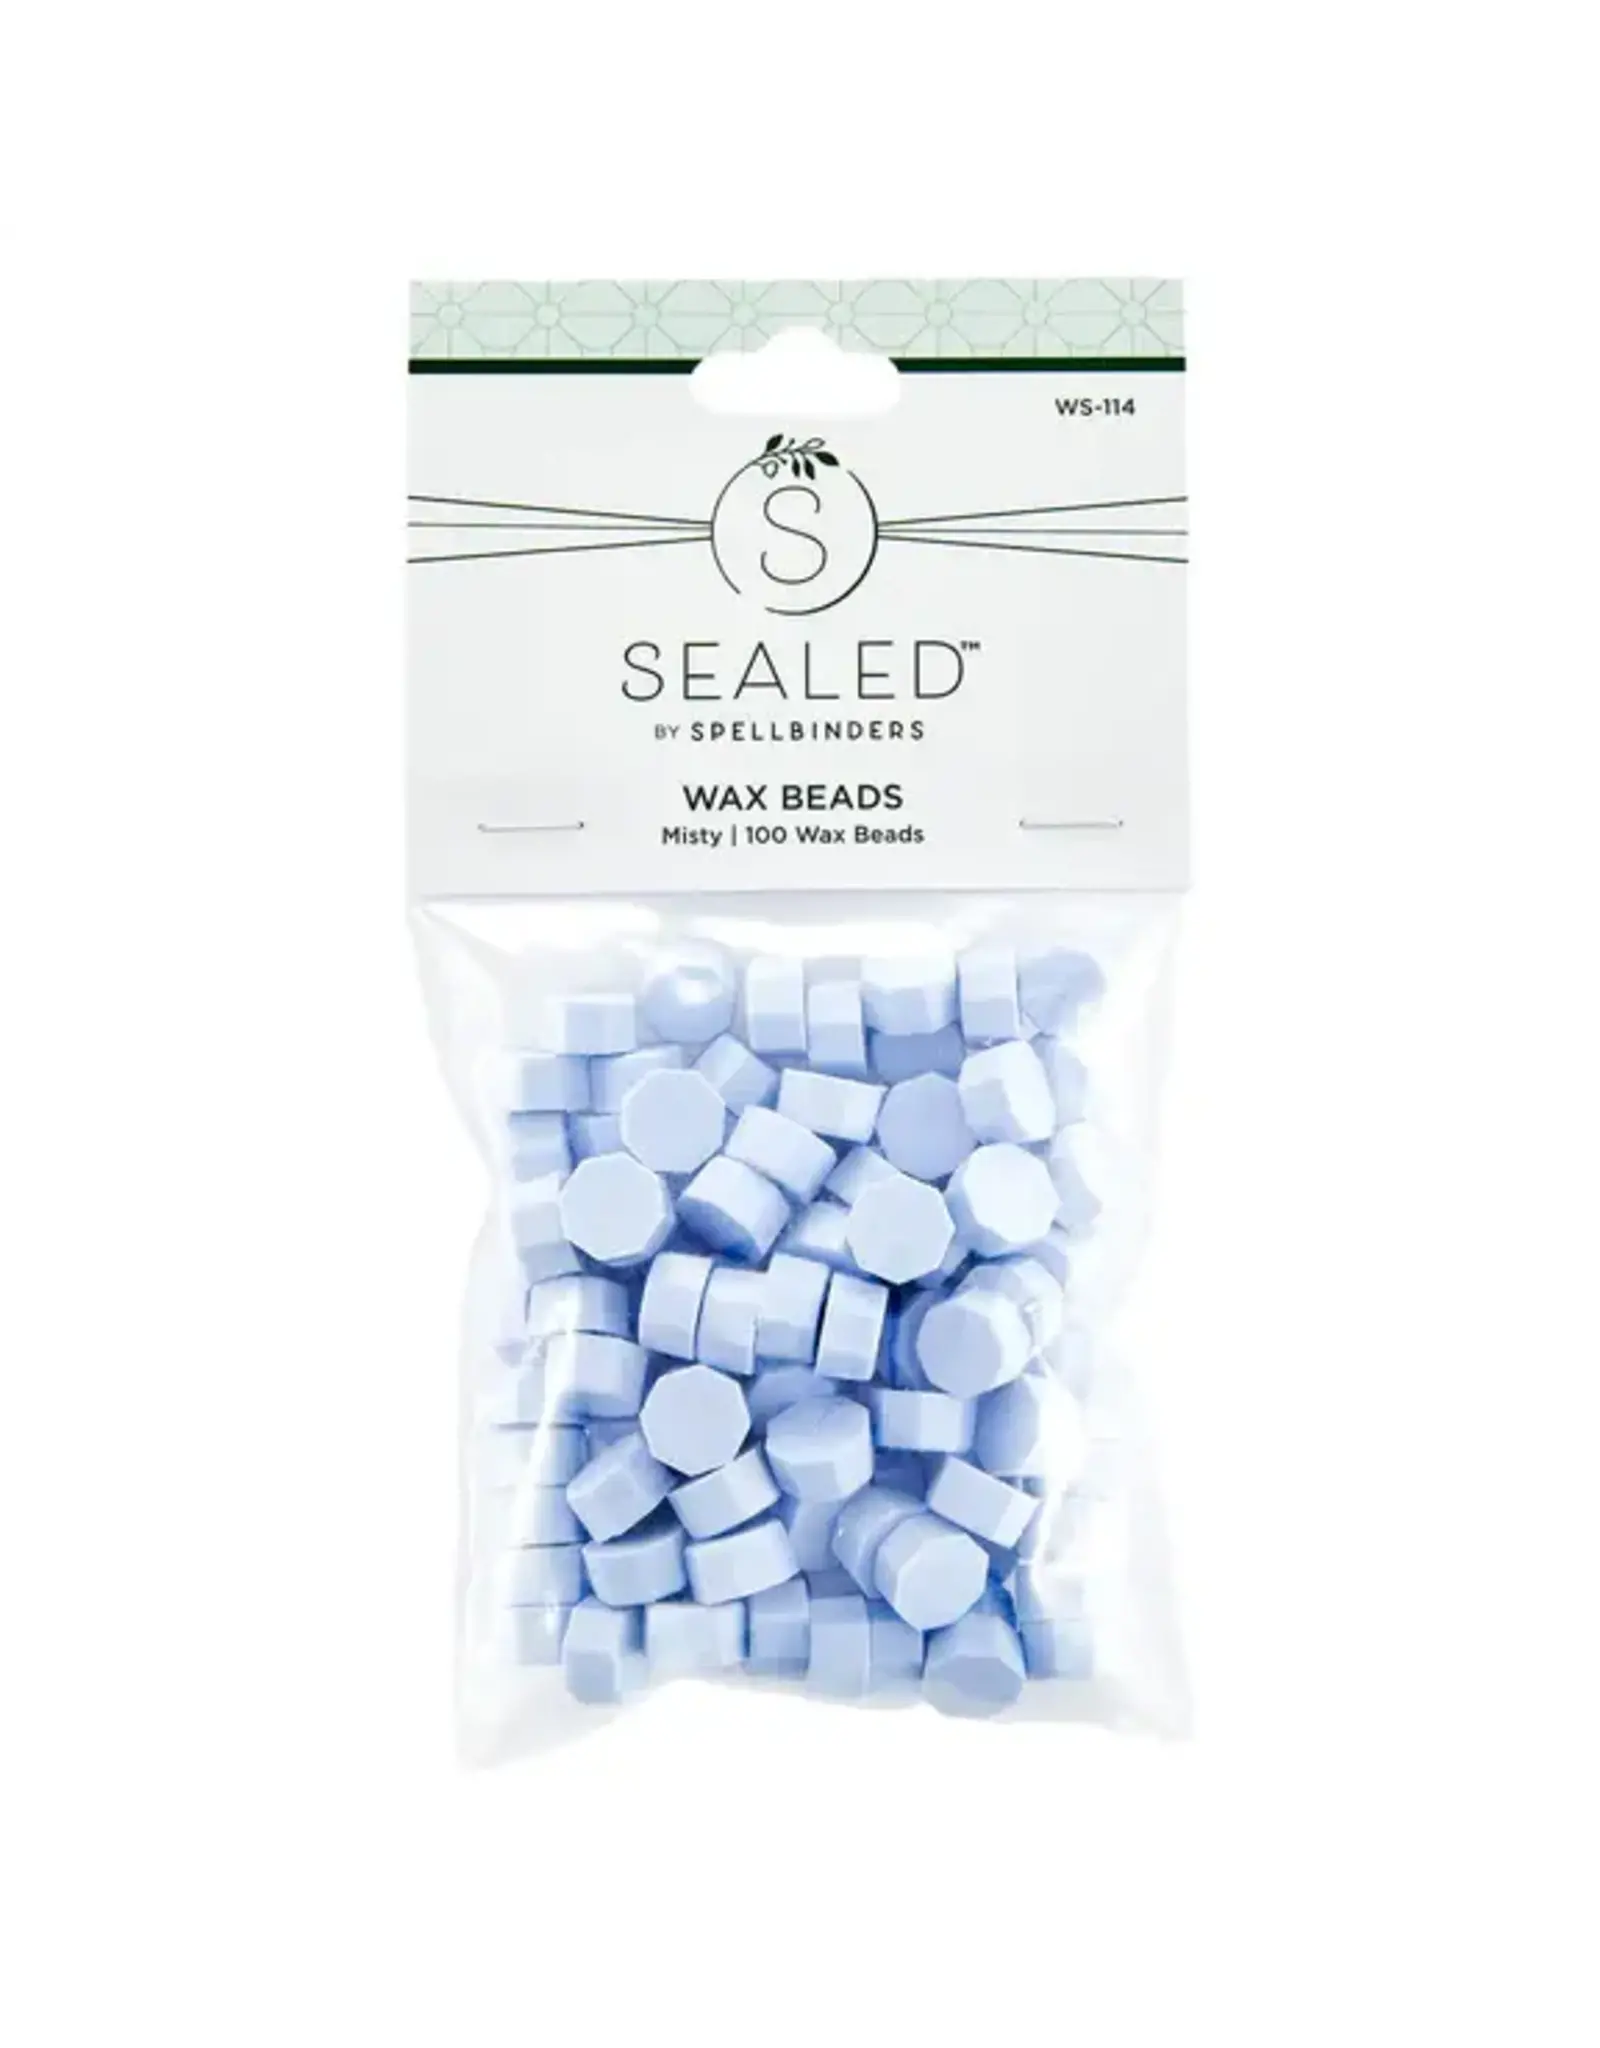 SPELLBINDERS SPELLBINDERS SEALED BY SPELLBINDERS COLLECTION MISTY WAX BEADS 100/PK